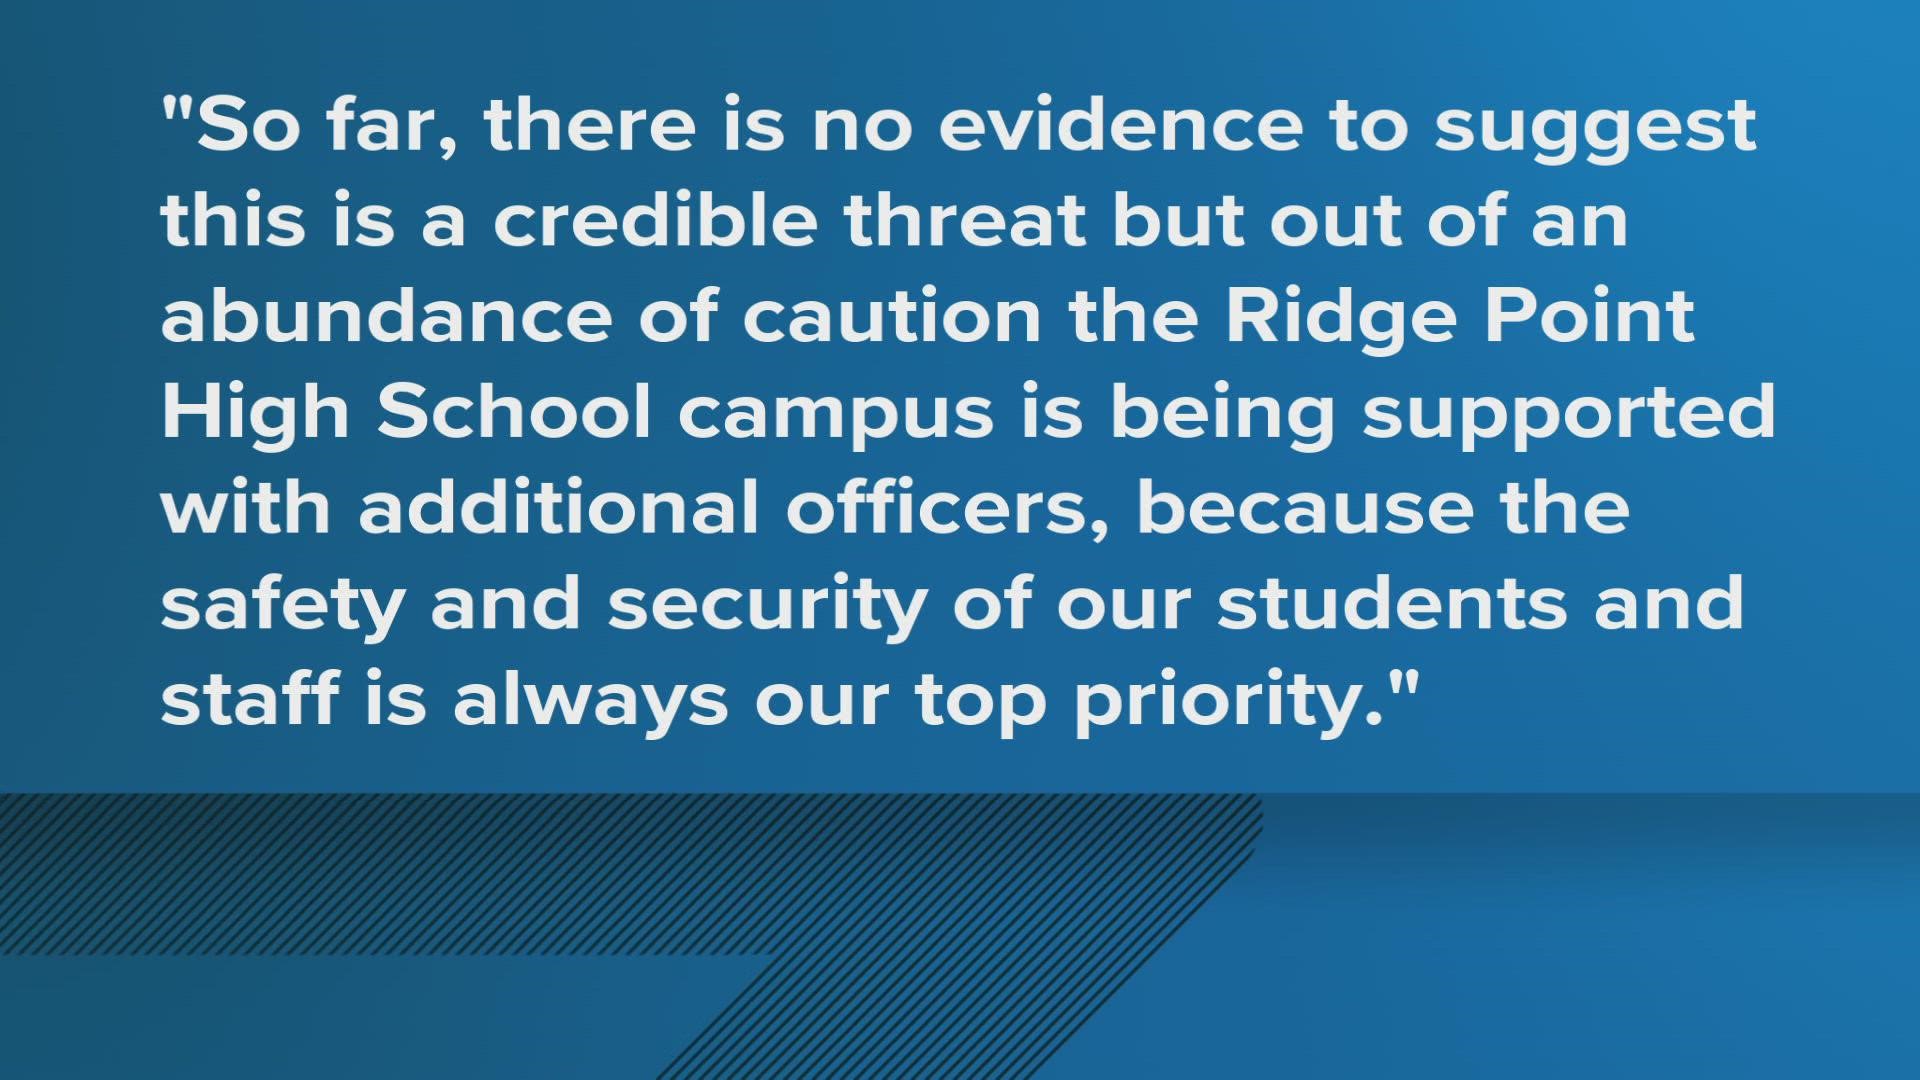 Parents were concerned after a threat was made against Ridge Point High School on social media early Tuesday morning.